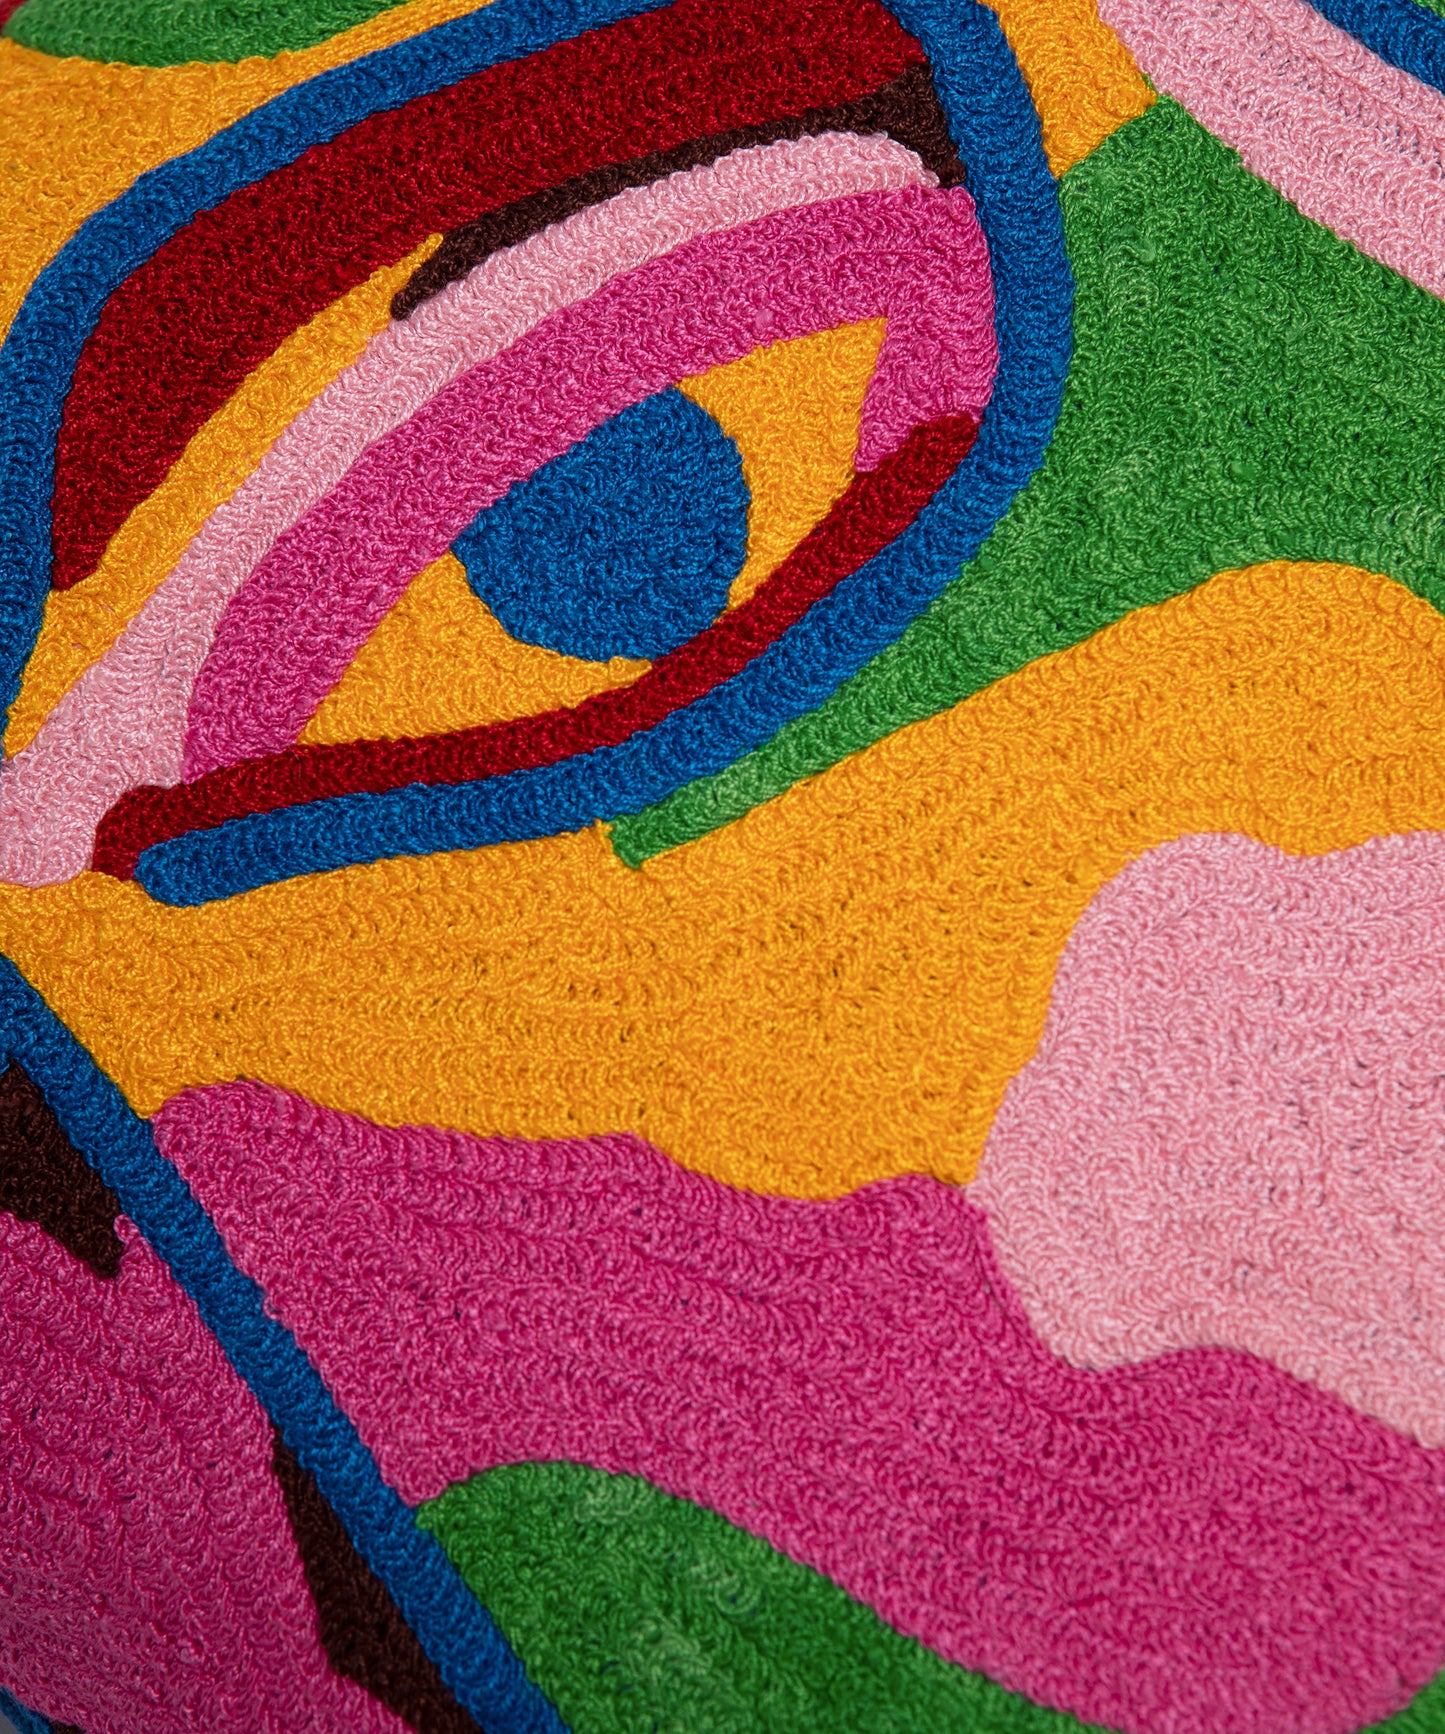 Close up of one of the eyes on the Portrait Pillow Cover showing the multiple colors and stitch pattern.